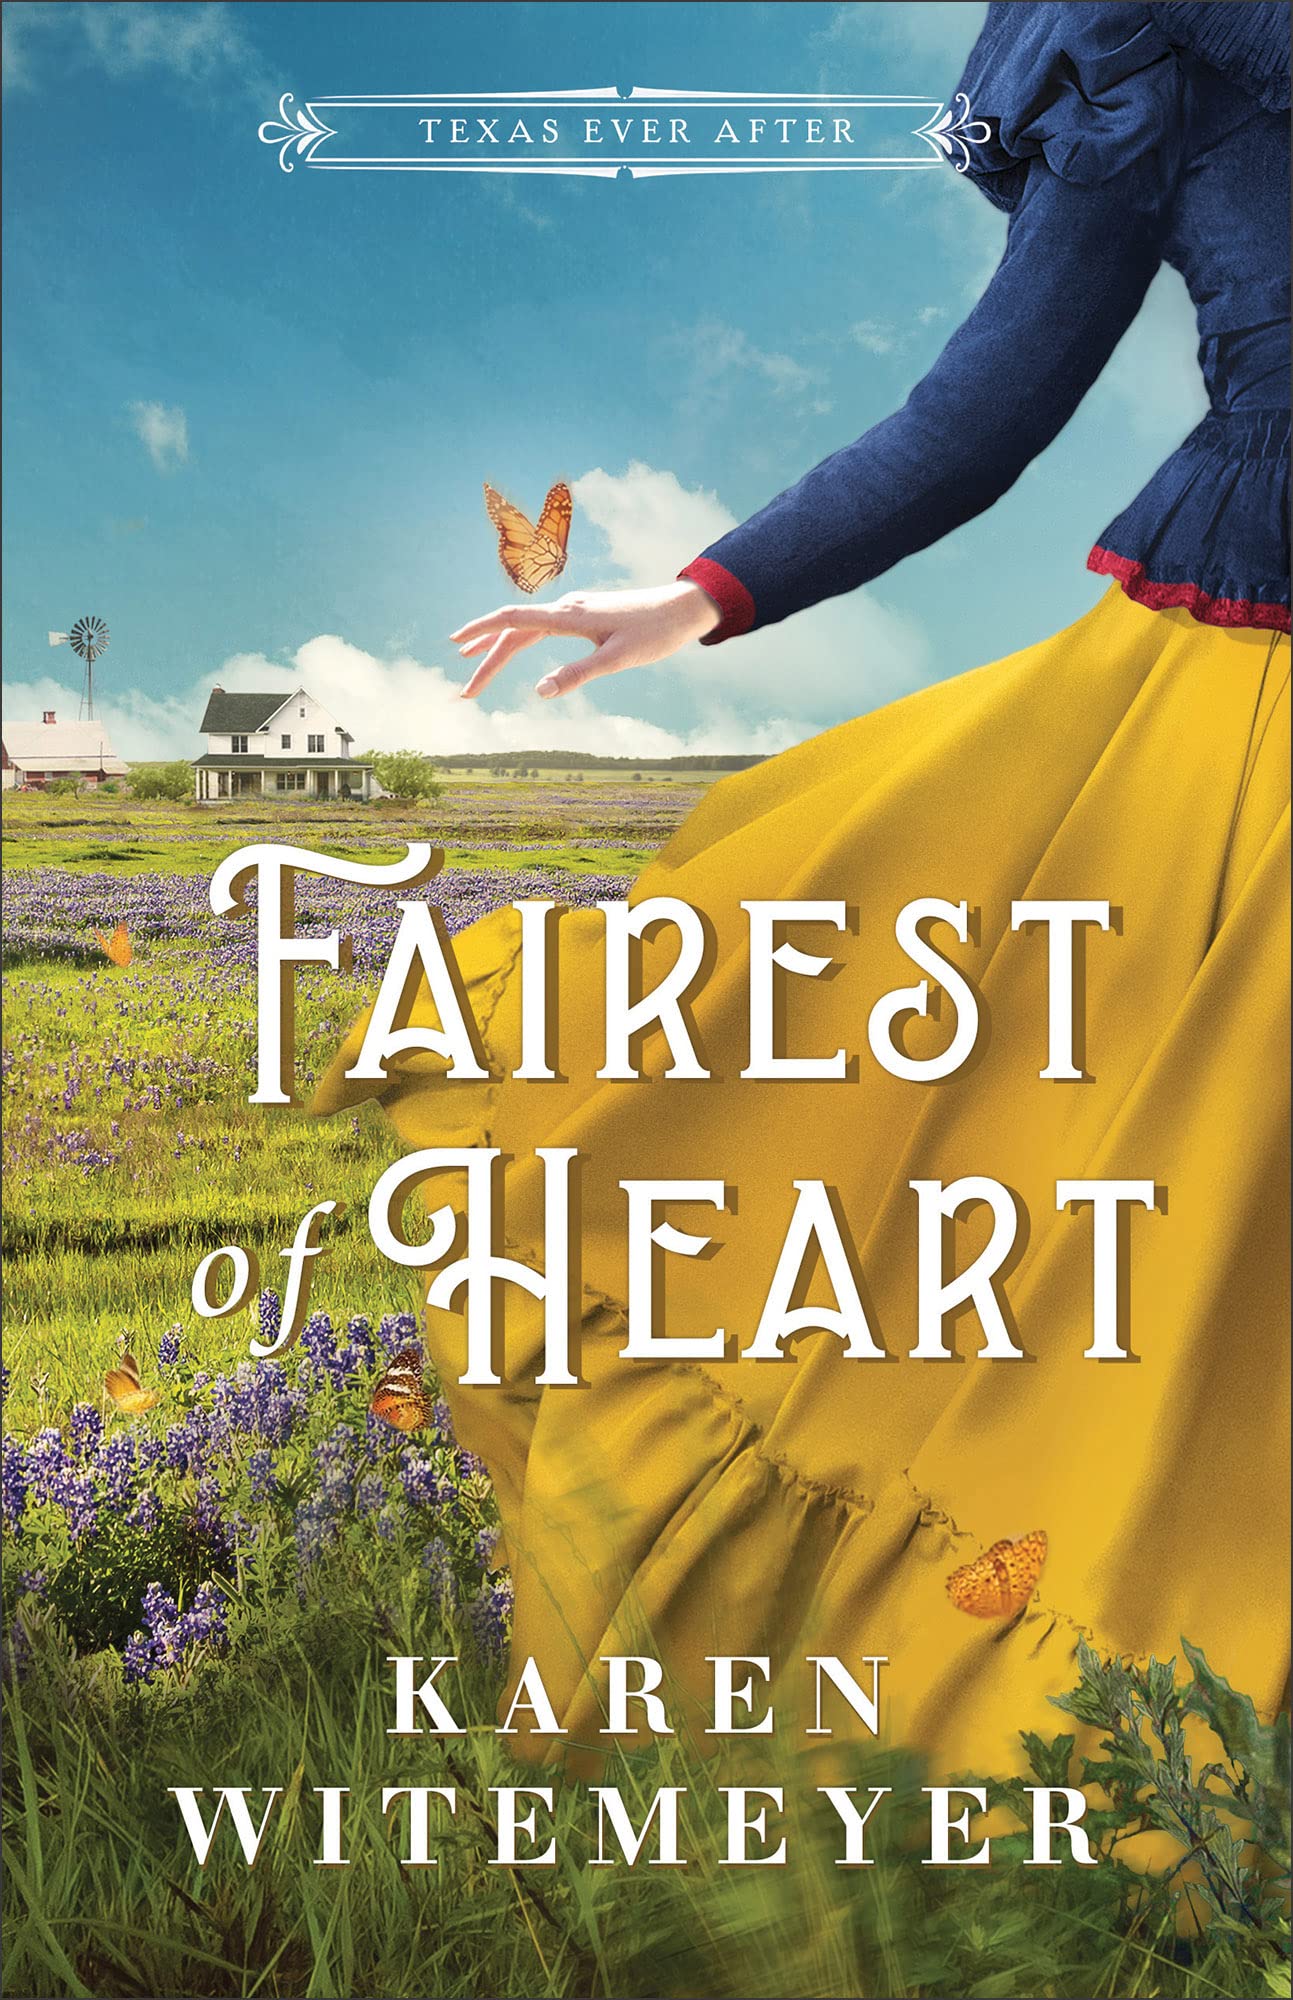 Fairest of Heart (Texas Ever After, #1)